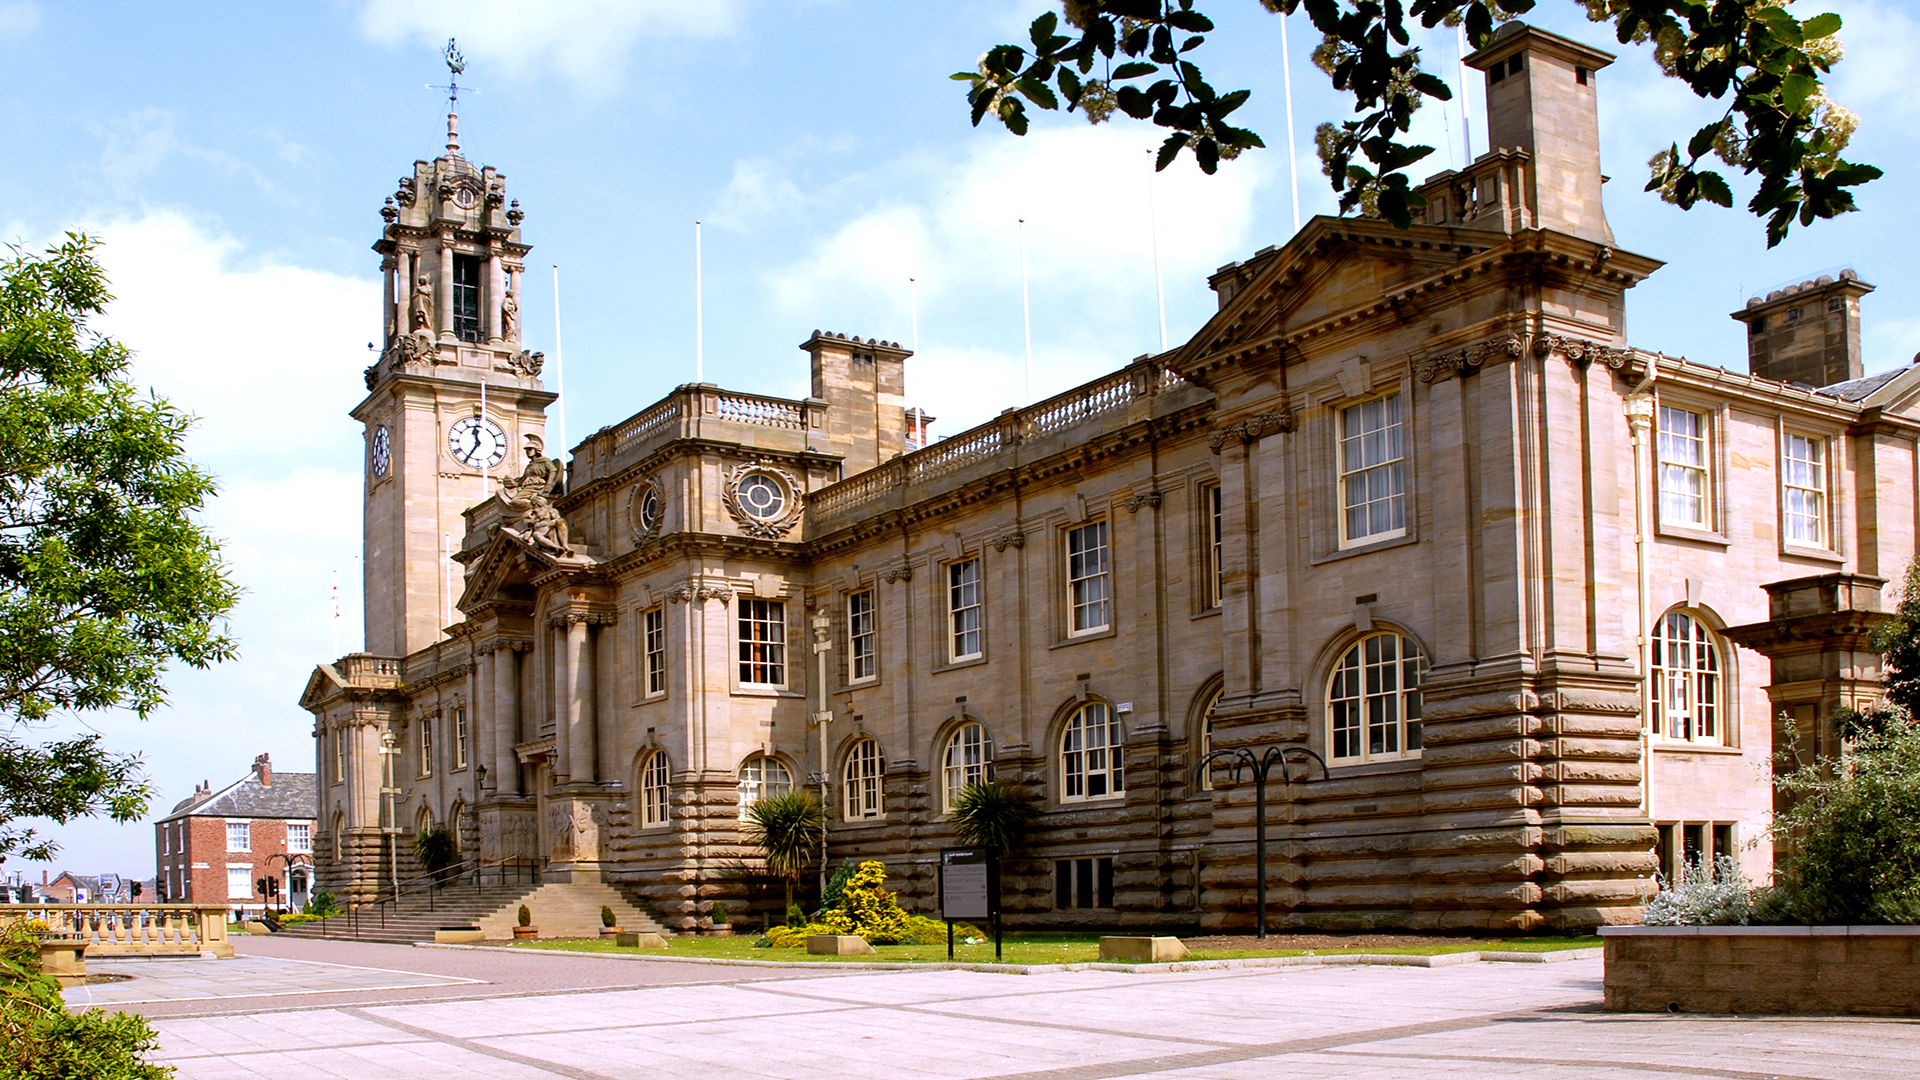 The main building of the south shields town hall